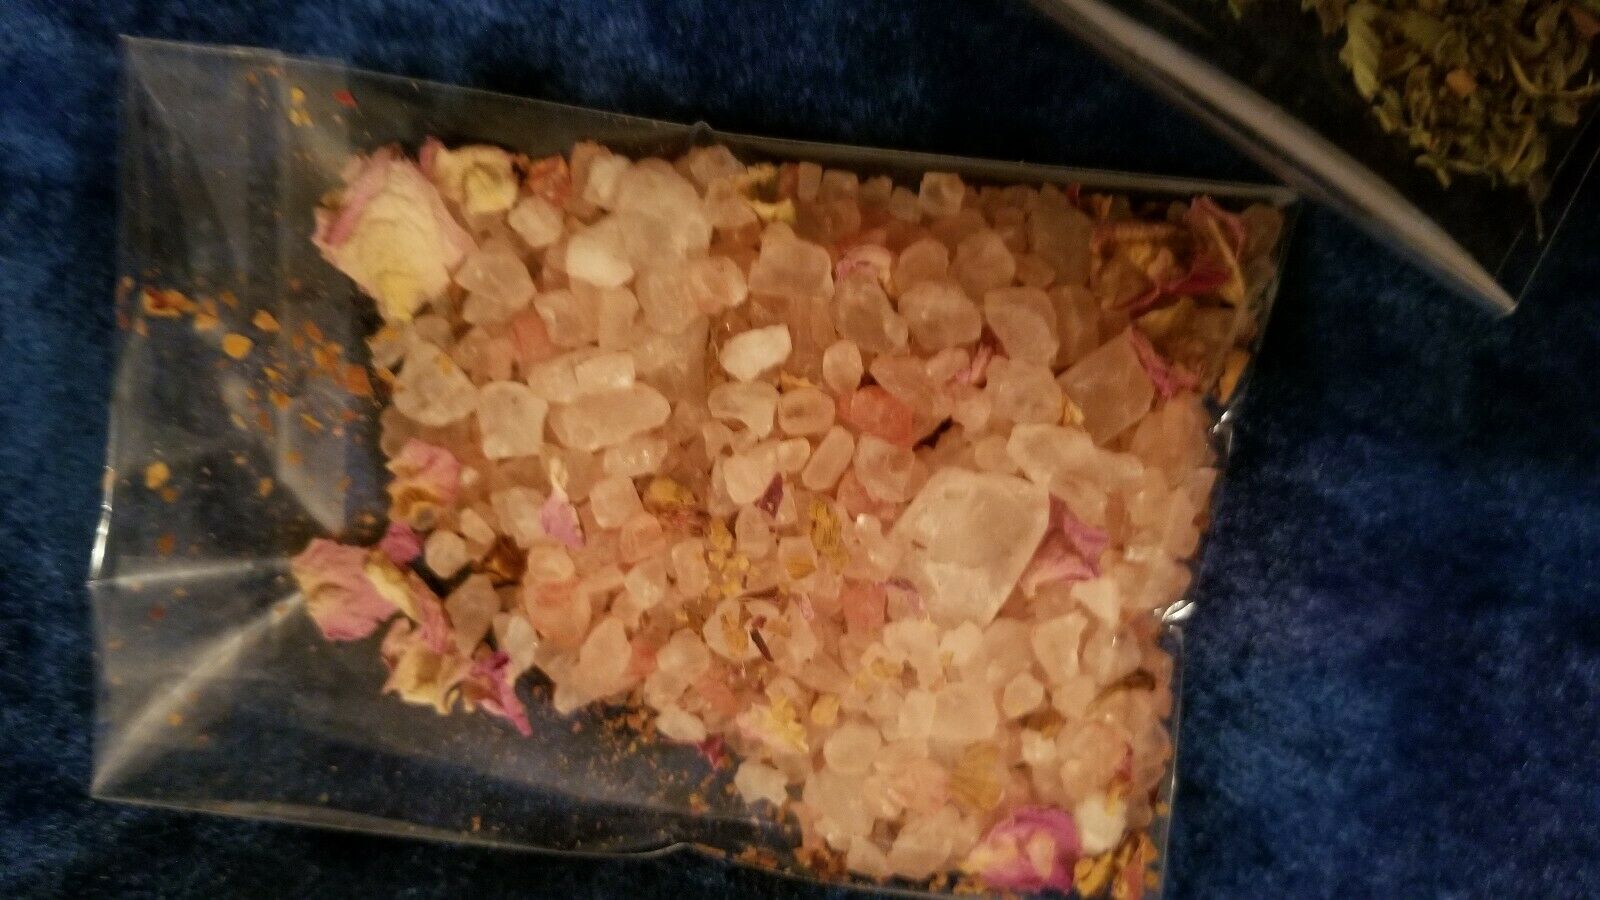 Love Spell Bath Ritual With Rose Petals, Herbs, Pink Himalayan Salt. Obsession.